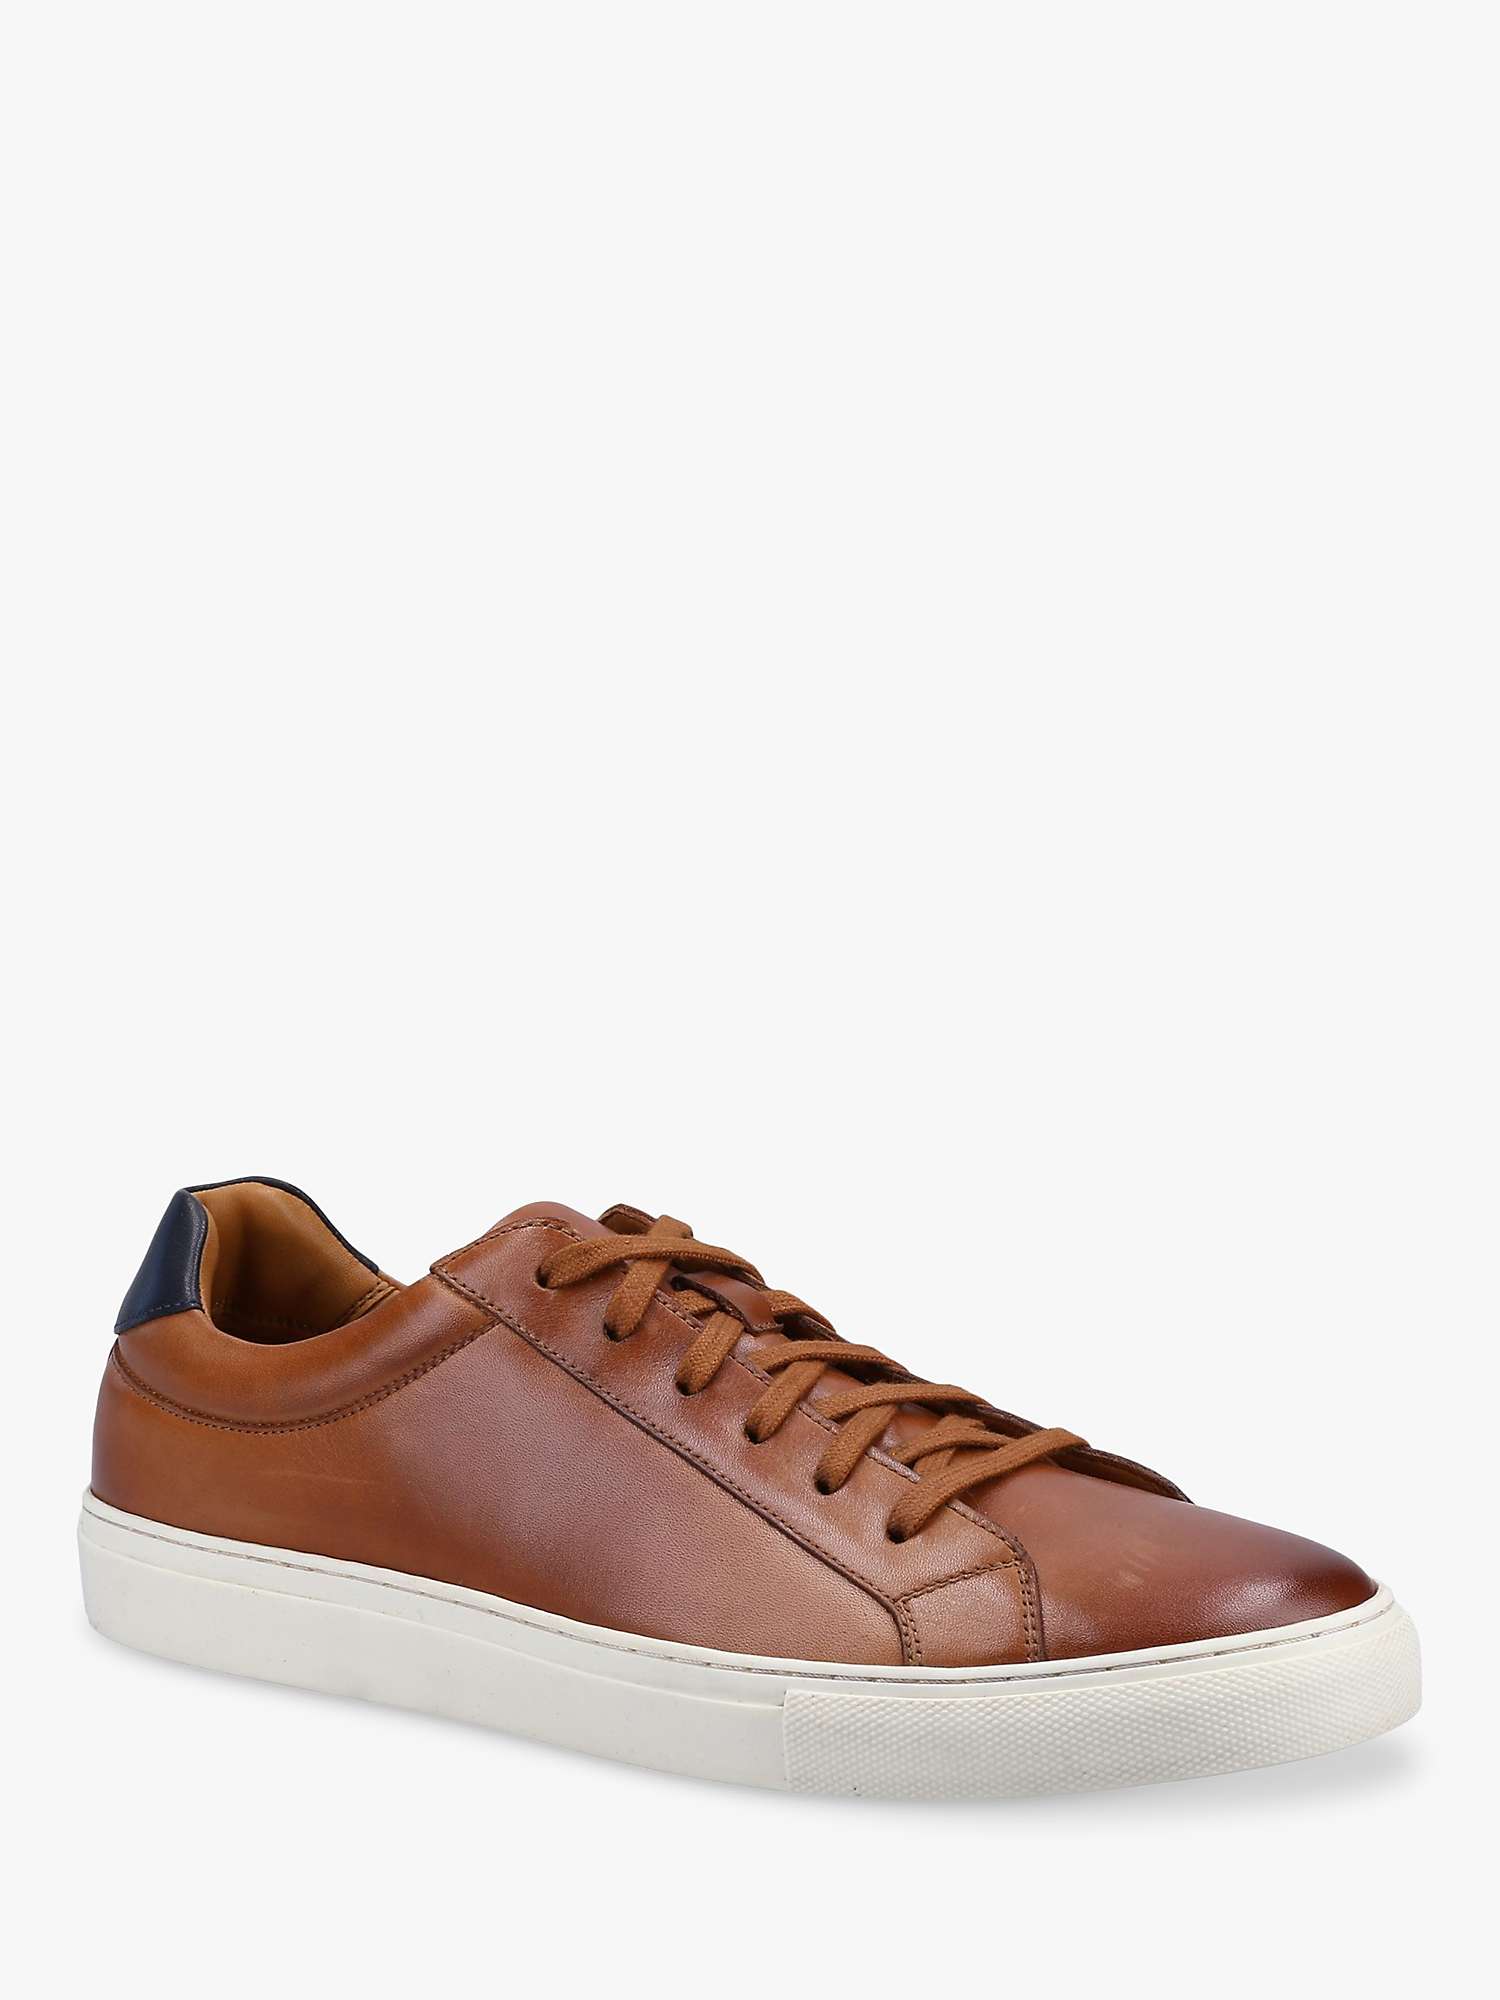 Buy Hush Puppies Colton Cupsole Trainers Online at johnlewis.com